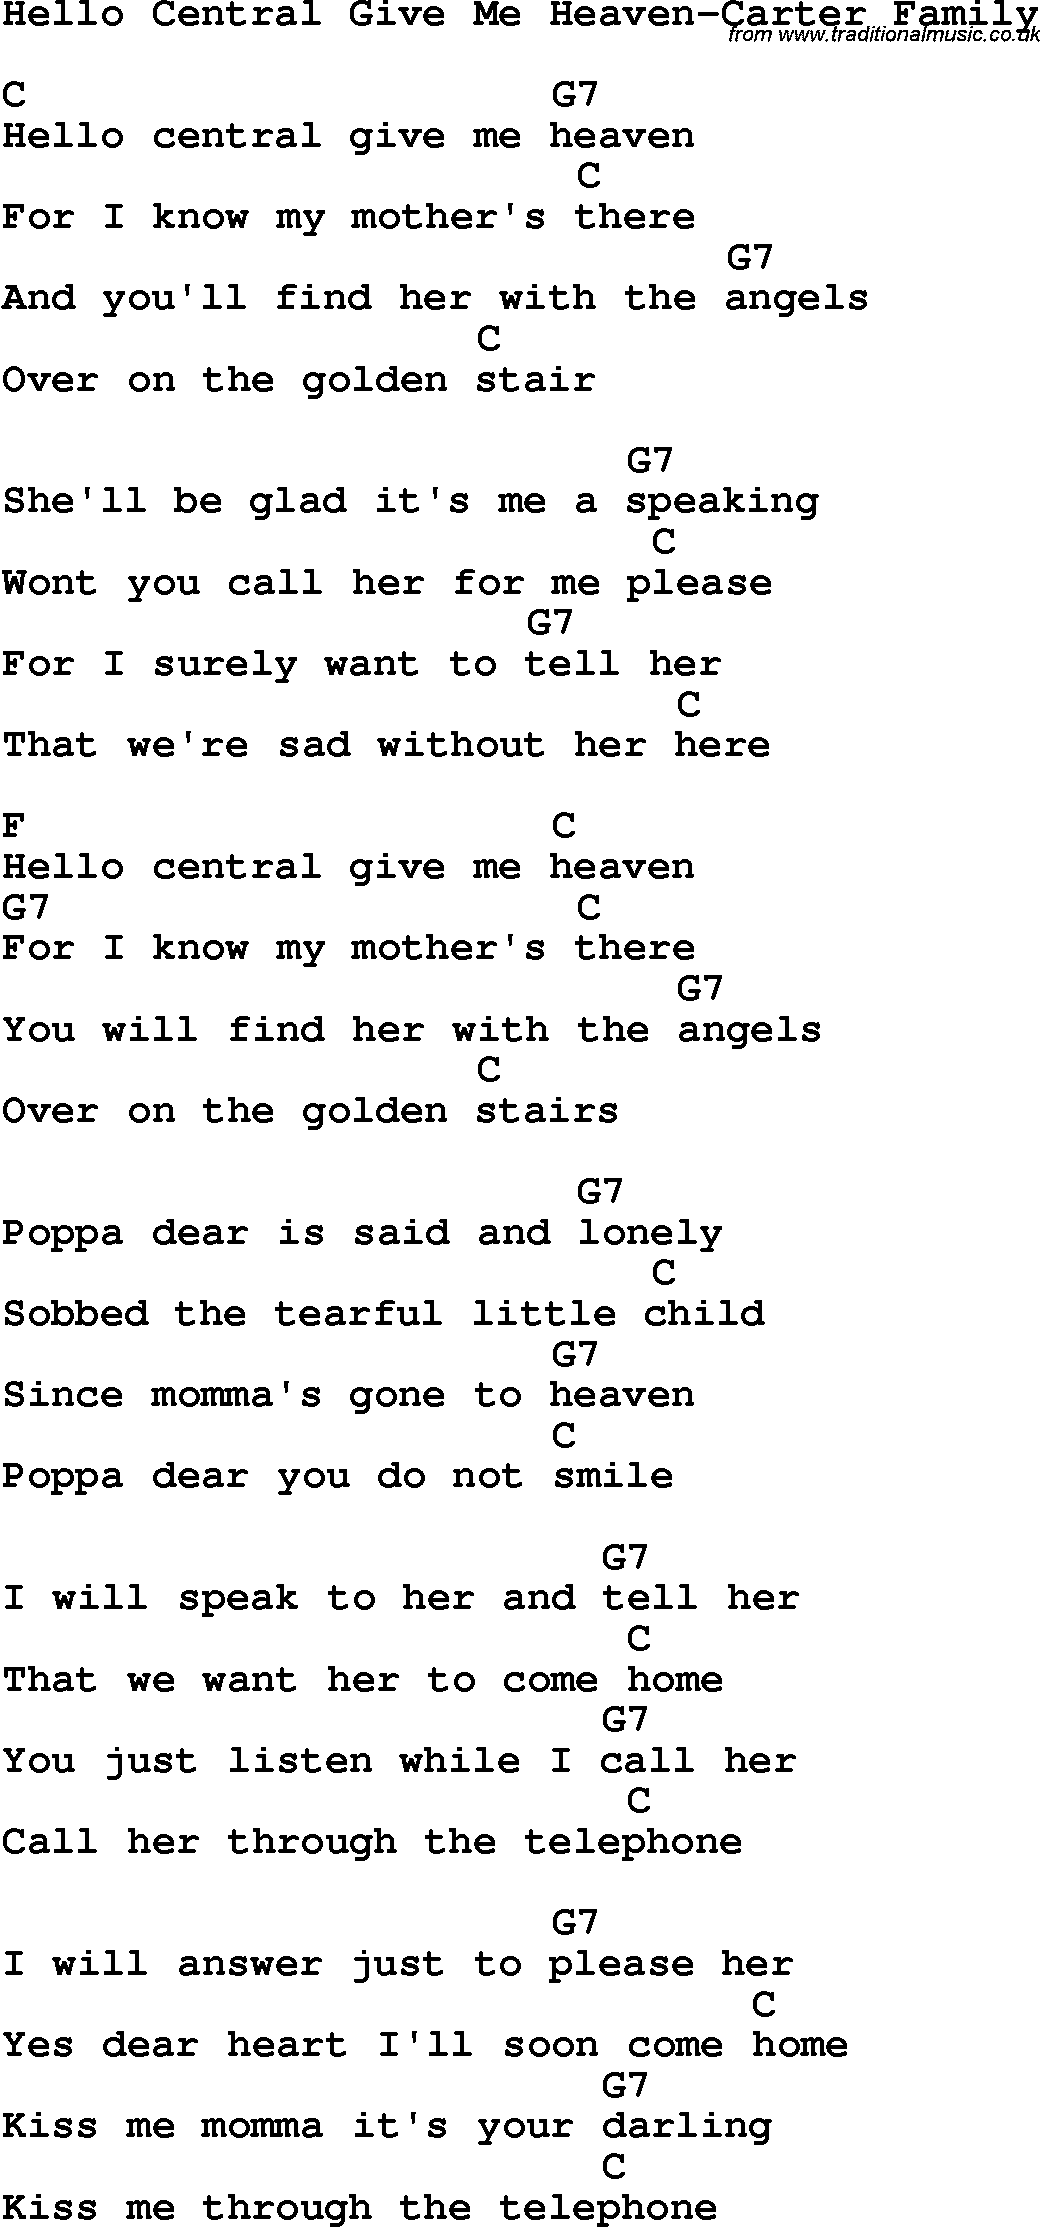 Country, Southern and Bluegrass Gospel Song Hello Central Give Me Heaven-Carter Family lyrics and chords